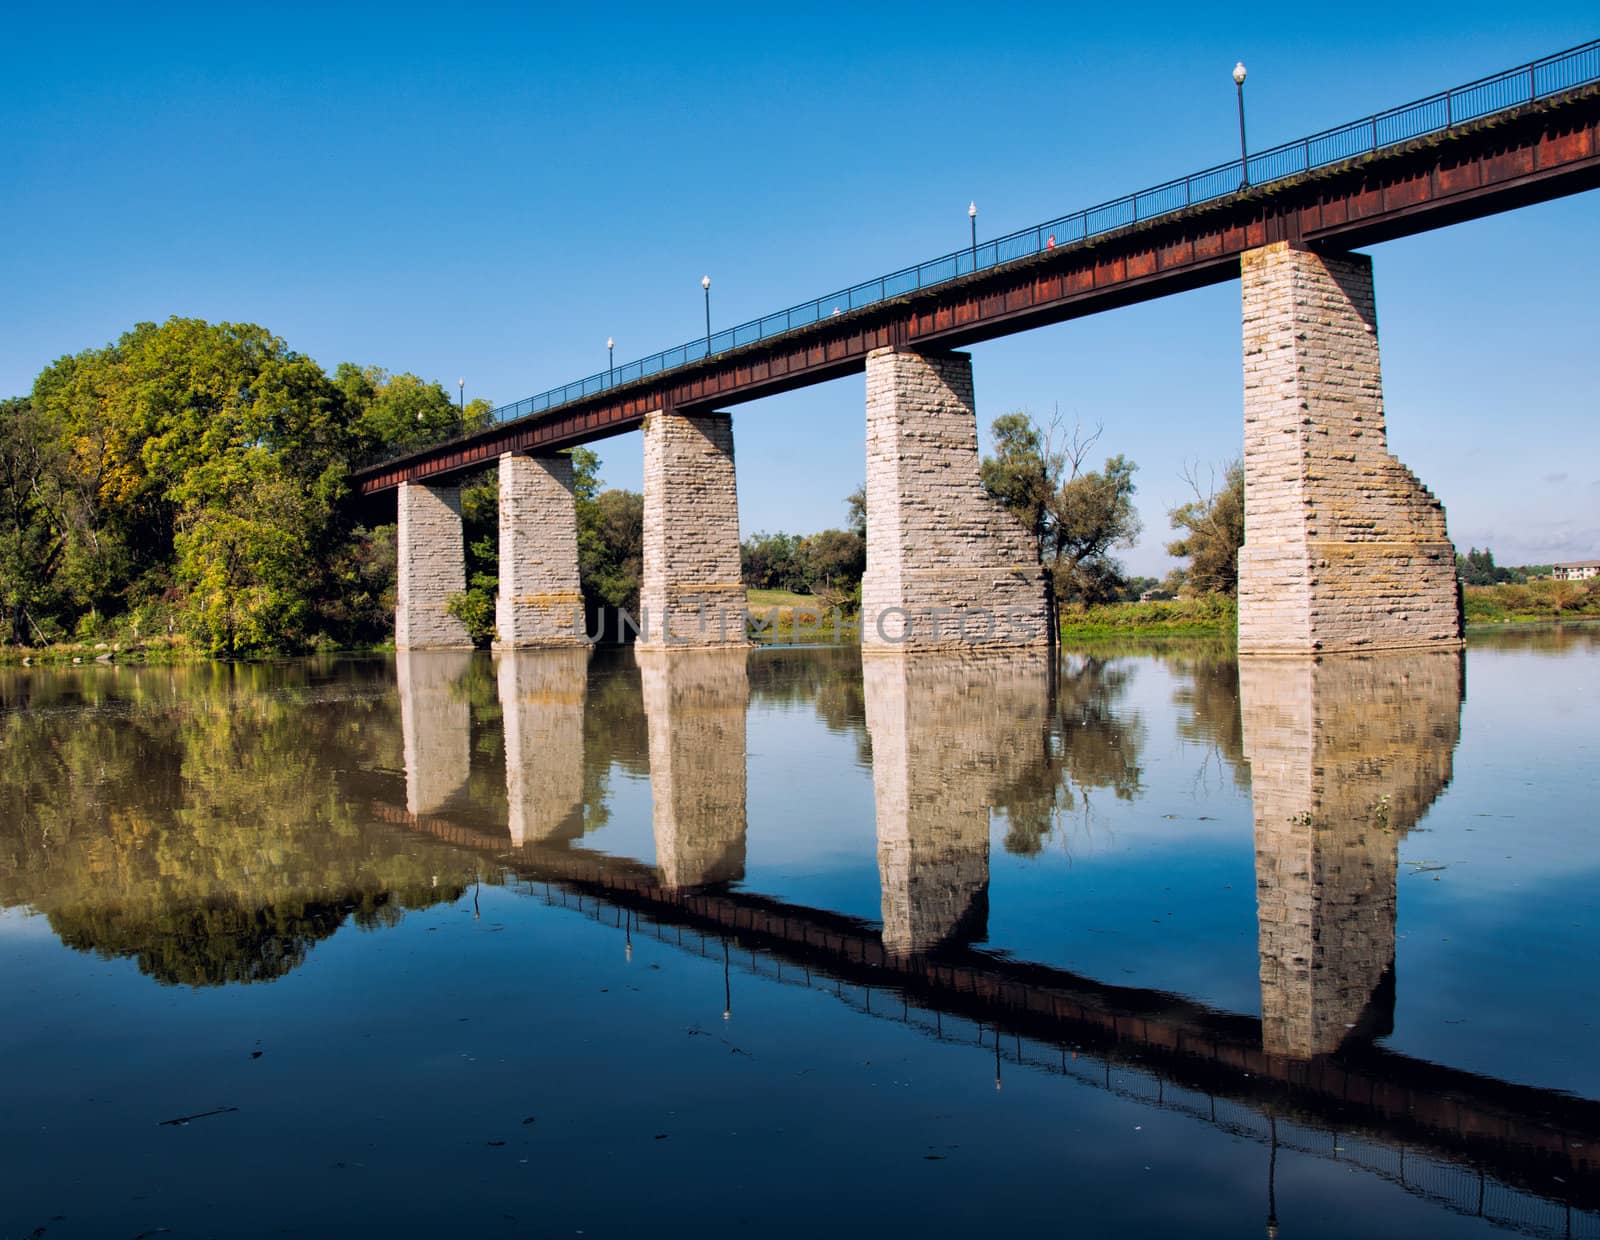 Historic railroad trestle over river with reflection in the river.